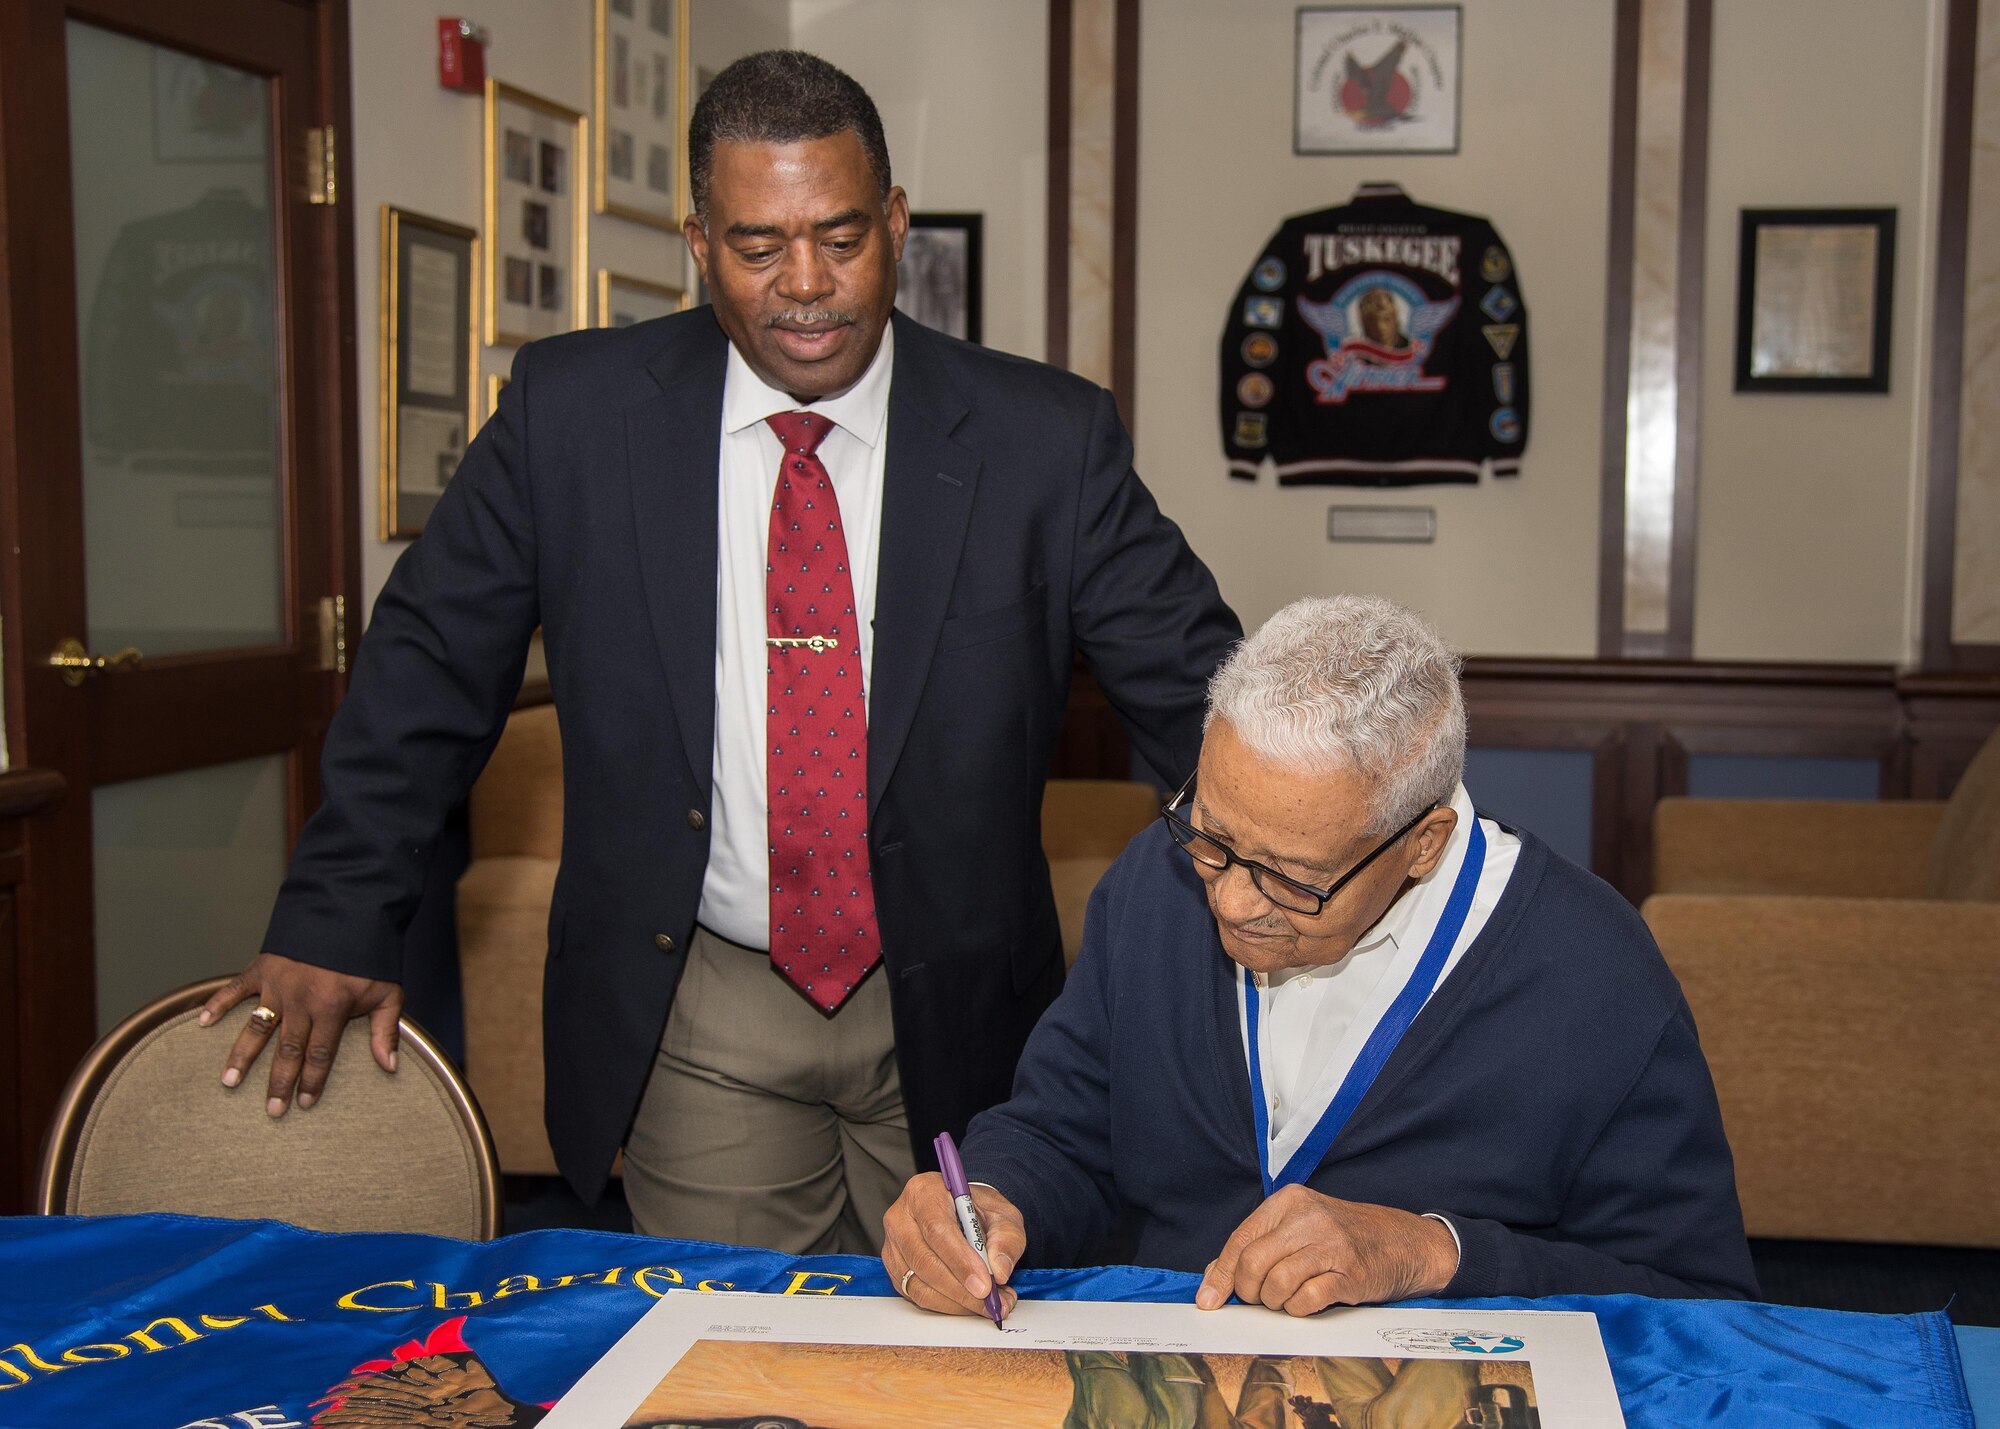 Retired Col. Charles E. McGee, an original Tuskegee Airman, signs a lithograph during a visit to the Minuteman Commons Oct. 27, while Galen Williams, the local Col. Charles E. McGee Tuskegee Airmen Chapter president, looks on. McGee held an impromptu meeting this week with Airmen prior to speaking at an event in Boston co-hosted by the New England Tuskegee Airmen Chapter and the local chapter bearing his name.